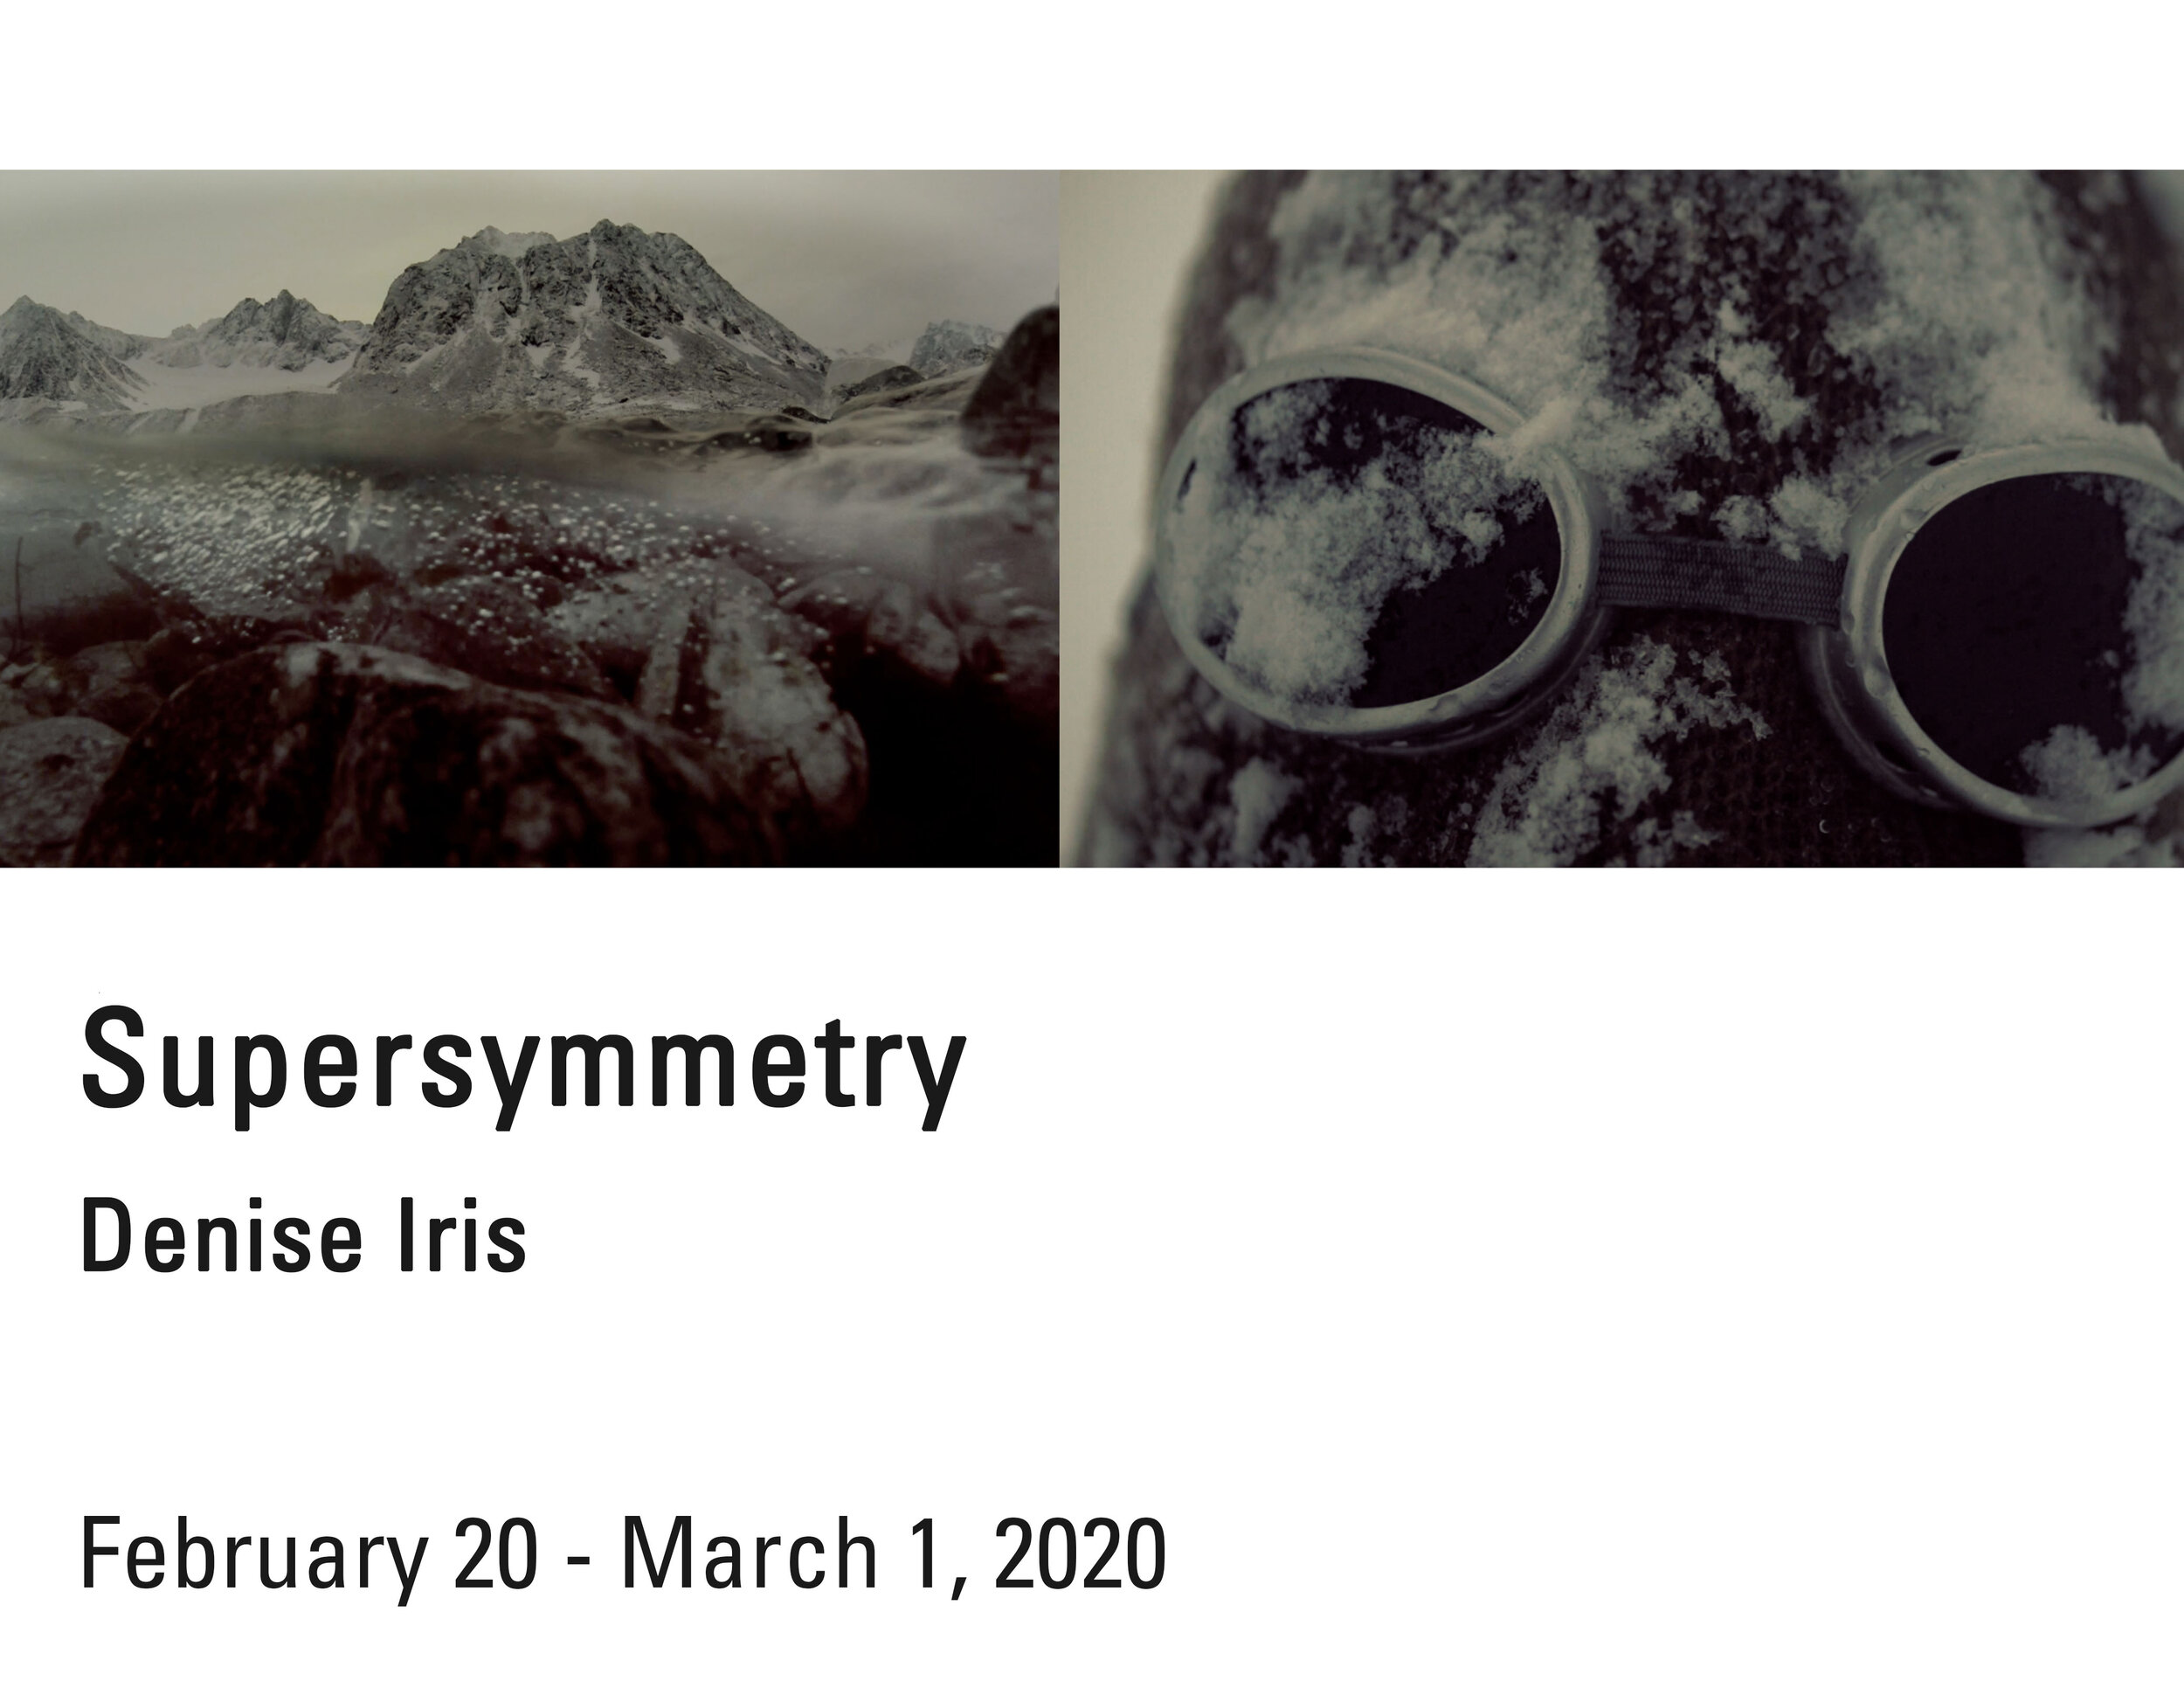 Denise Iris, Supersymmetry, FLEX space exhibition, On view February 20–March 1, 2020. (Copy)